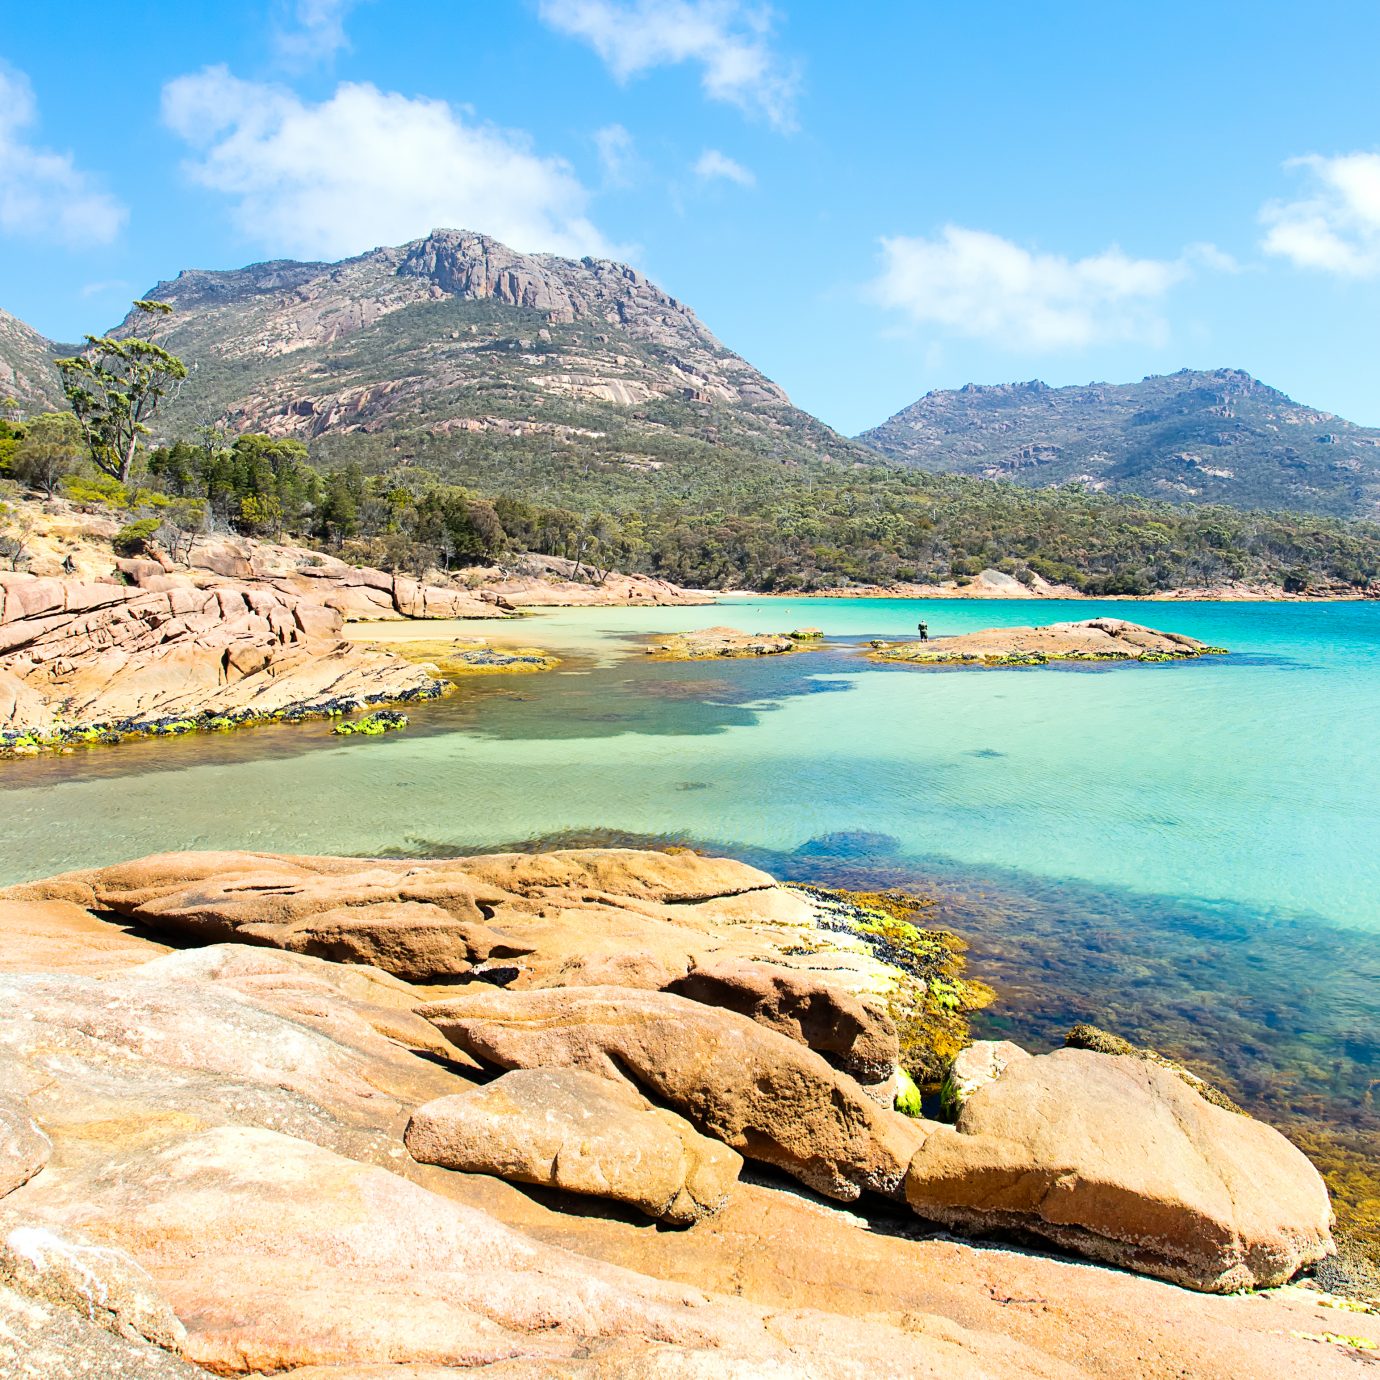 Honeymoon Bay in the Freycinet National Park on a clear day with blue water